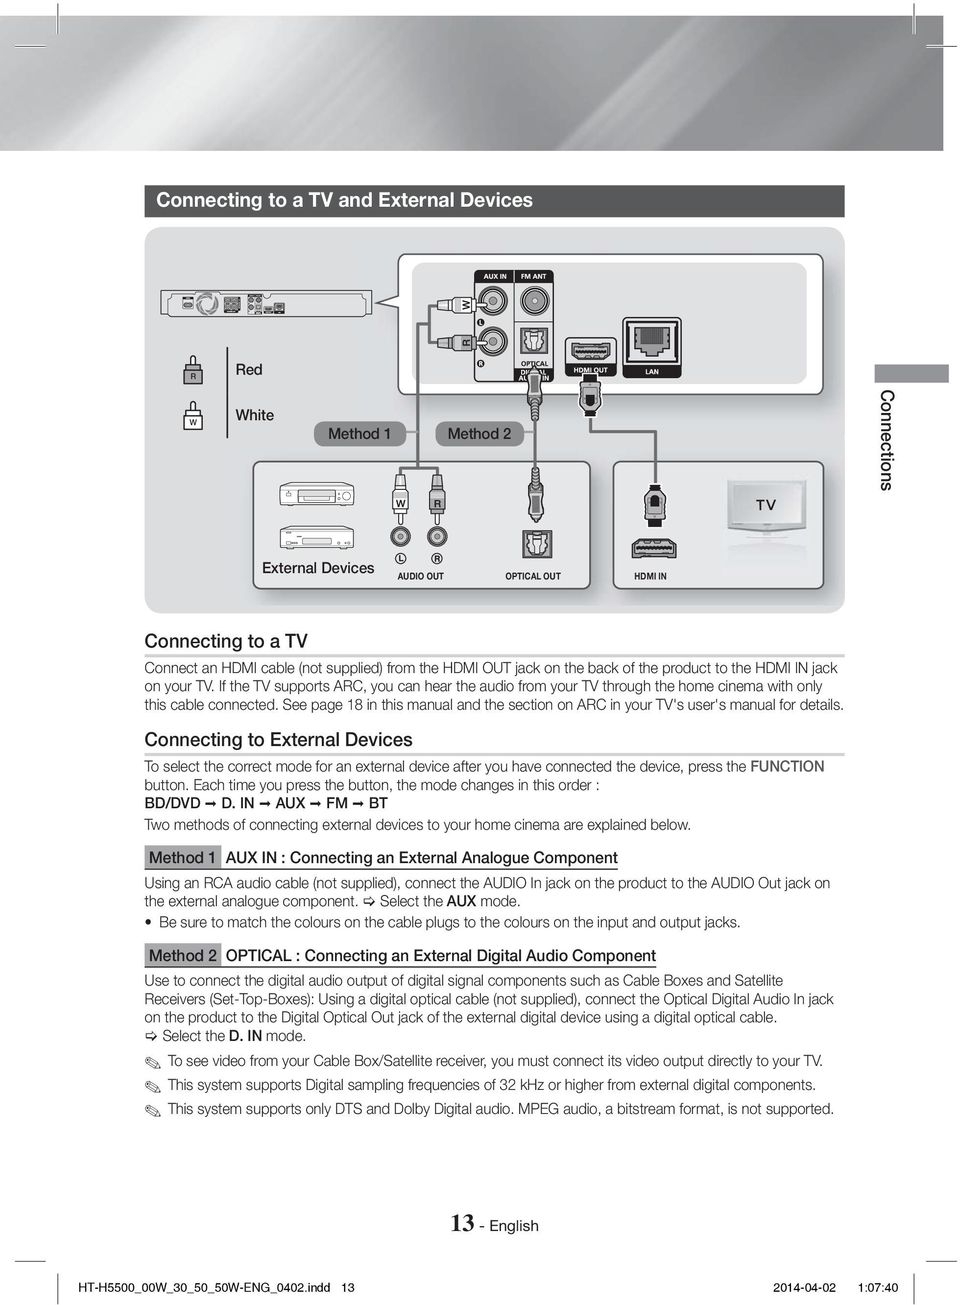 See page 18 in this manual and the section on ARC in your TV's user's manual for details.